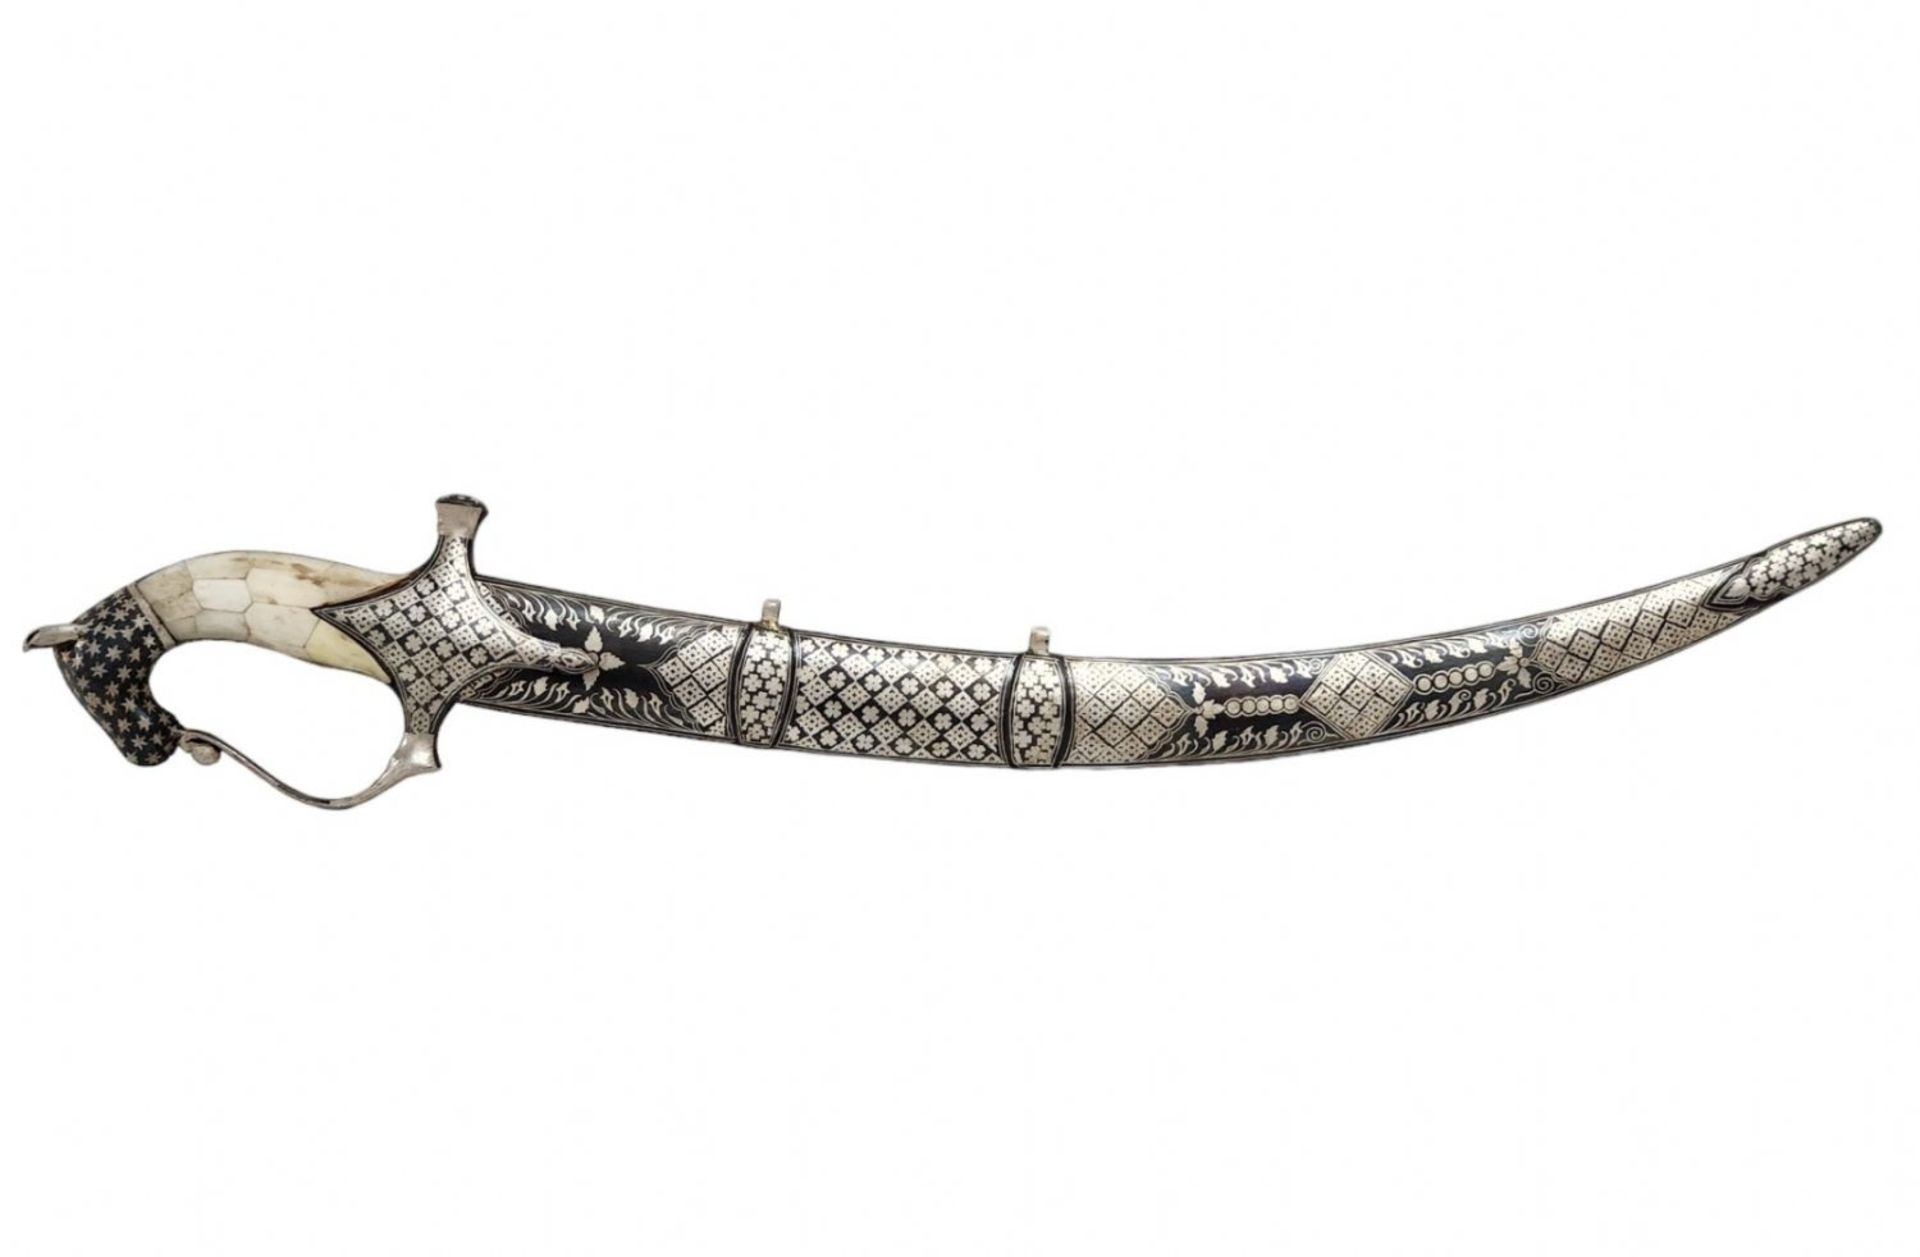 Decorative sword, made of metal and pieces of bone, decorated. Total length: 65 cm. Total width: